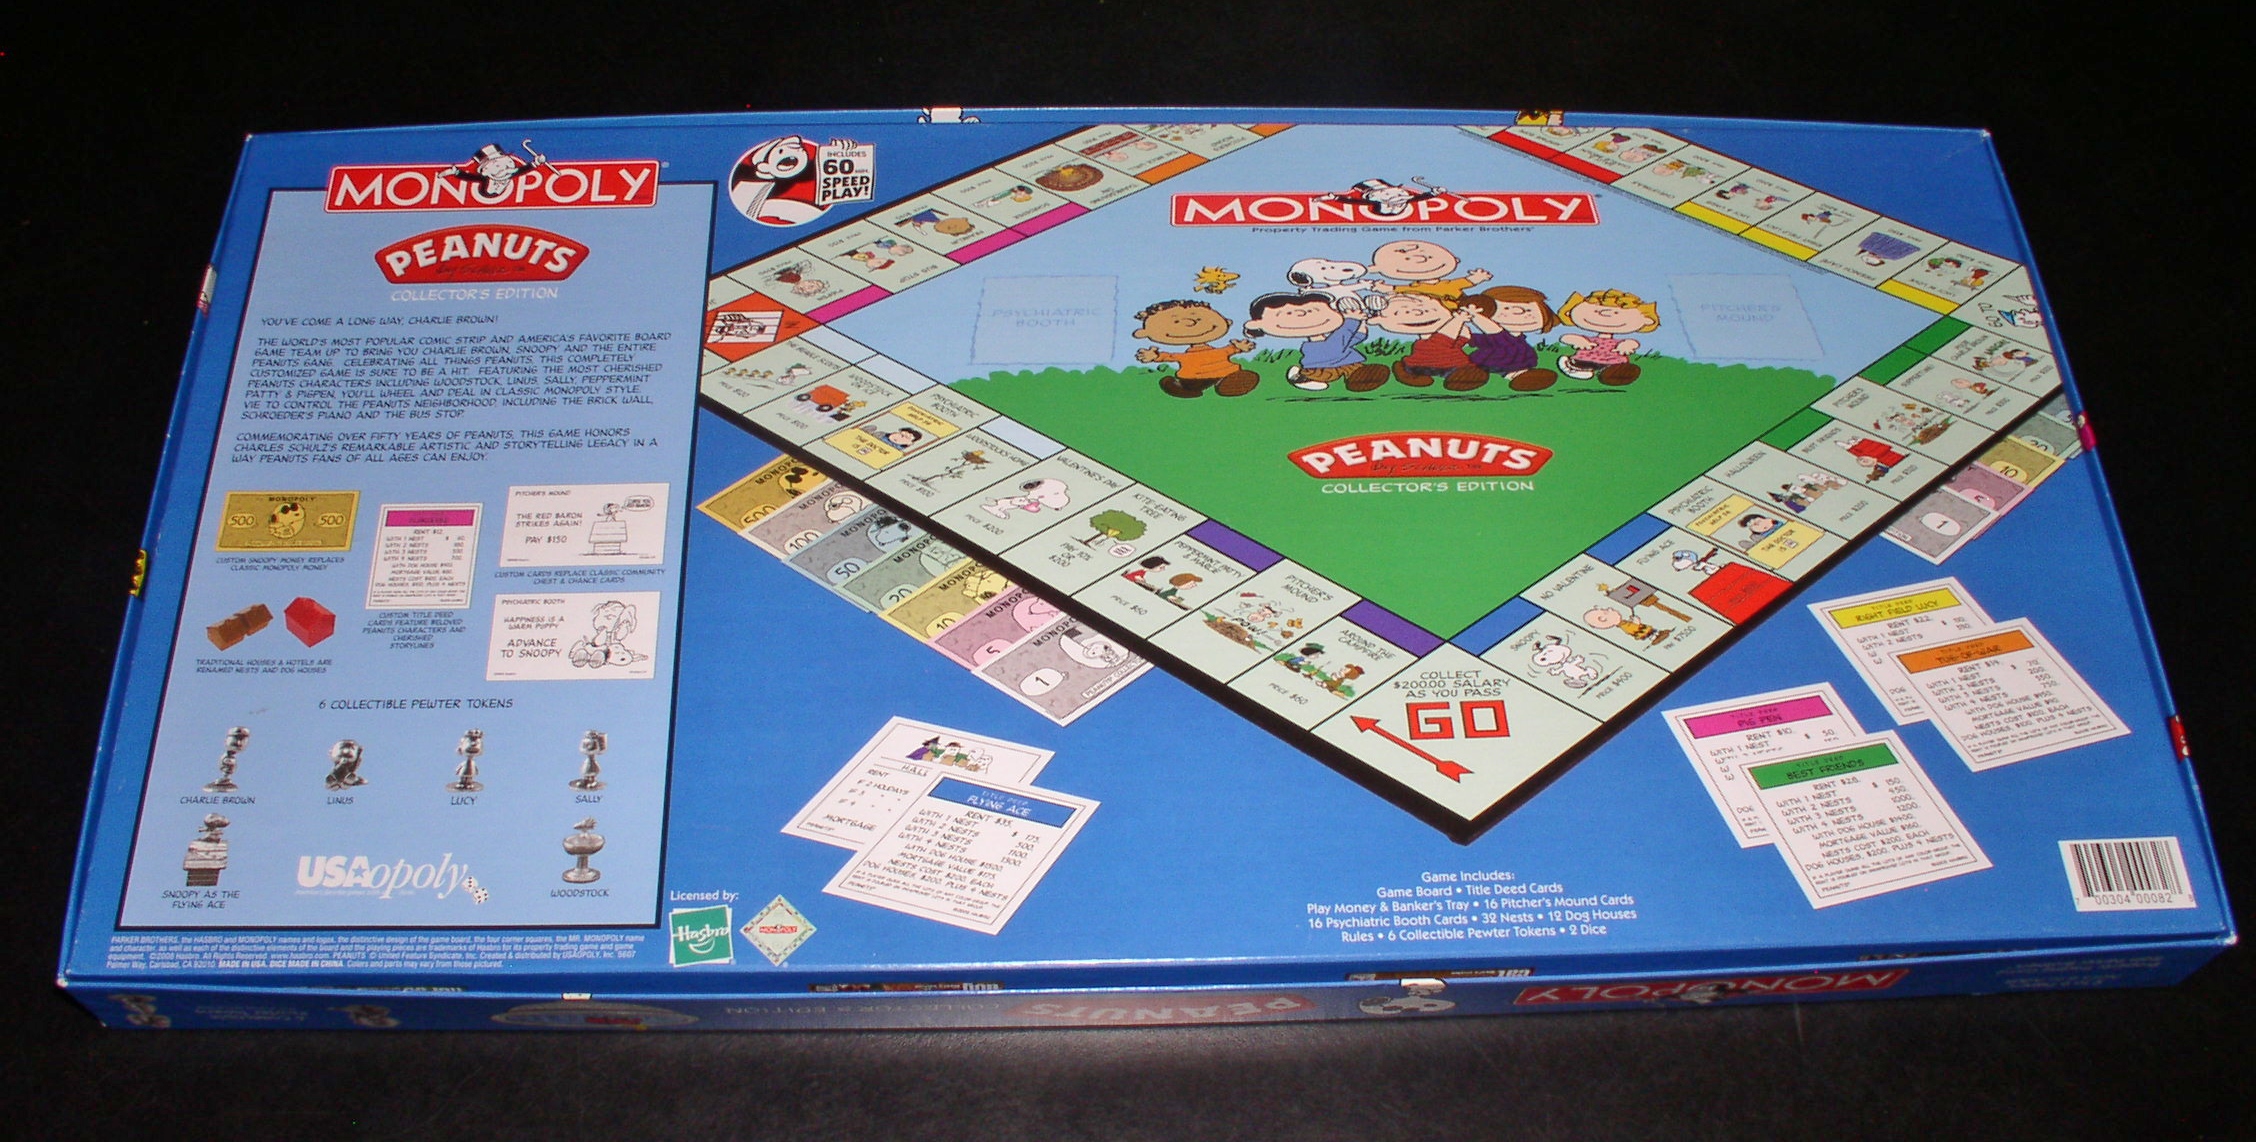 Monopoly - Peanuts Collector's Edition - Parker Brothers (2008)